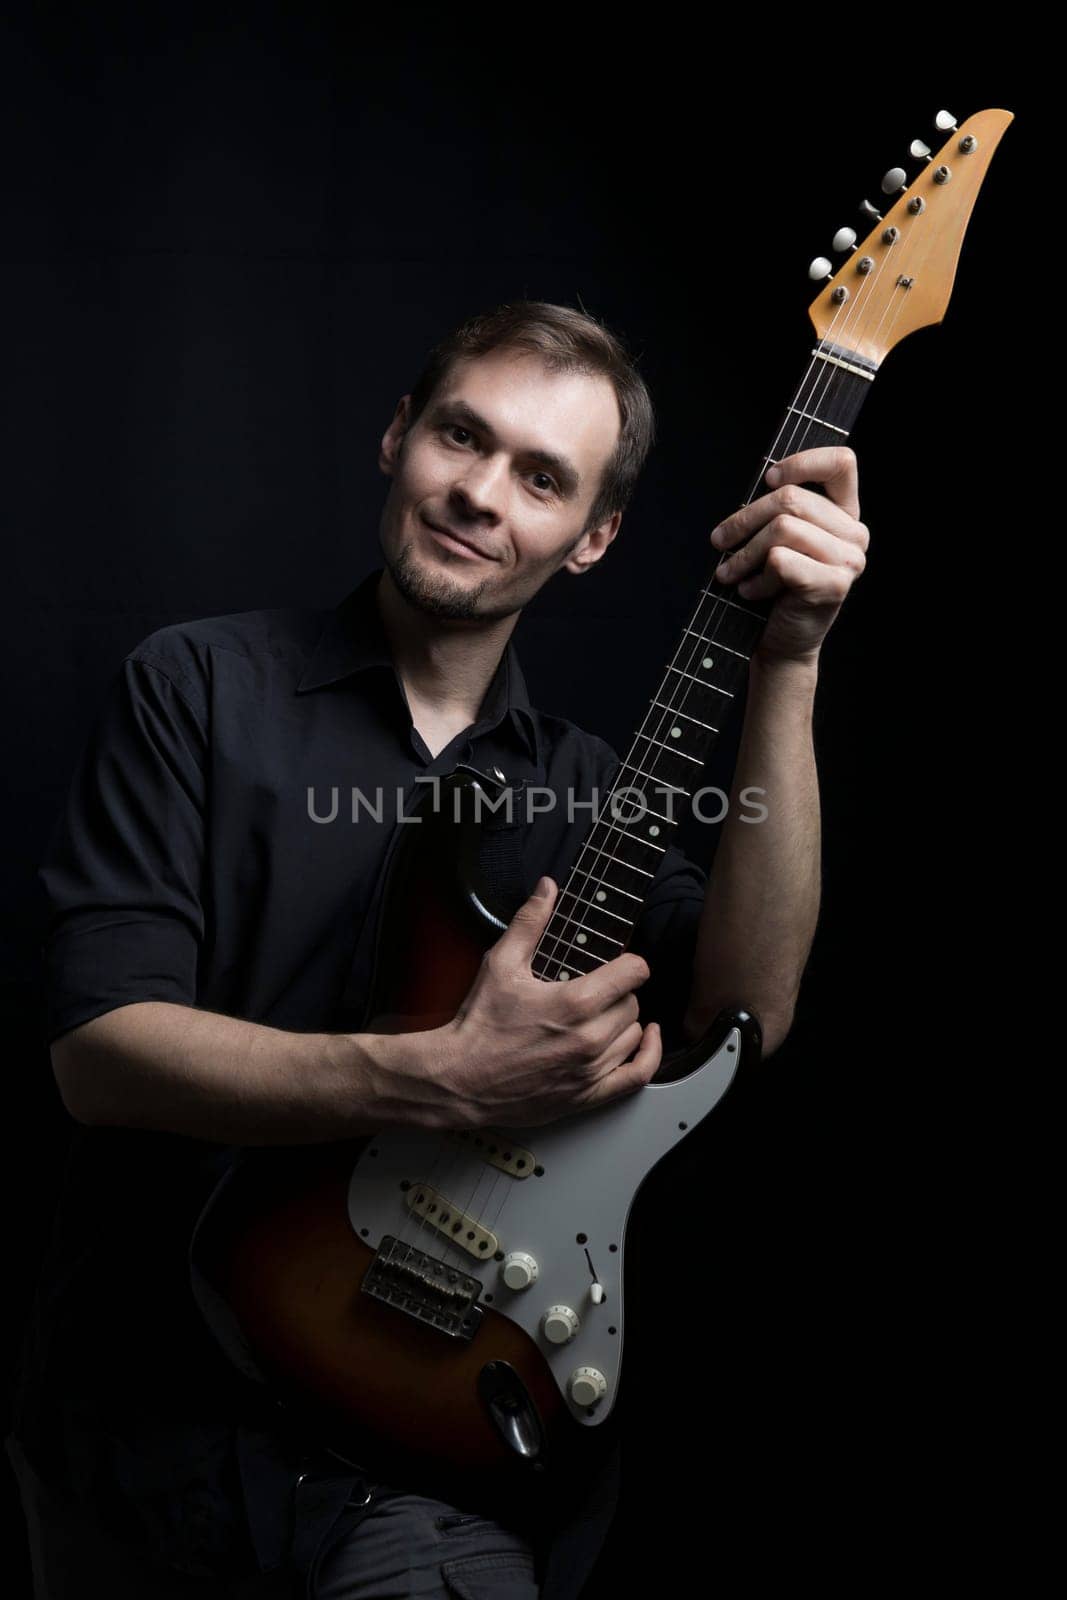 A man with an electric guitar looks at the camera.